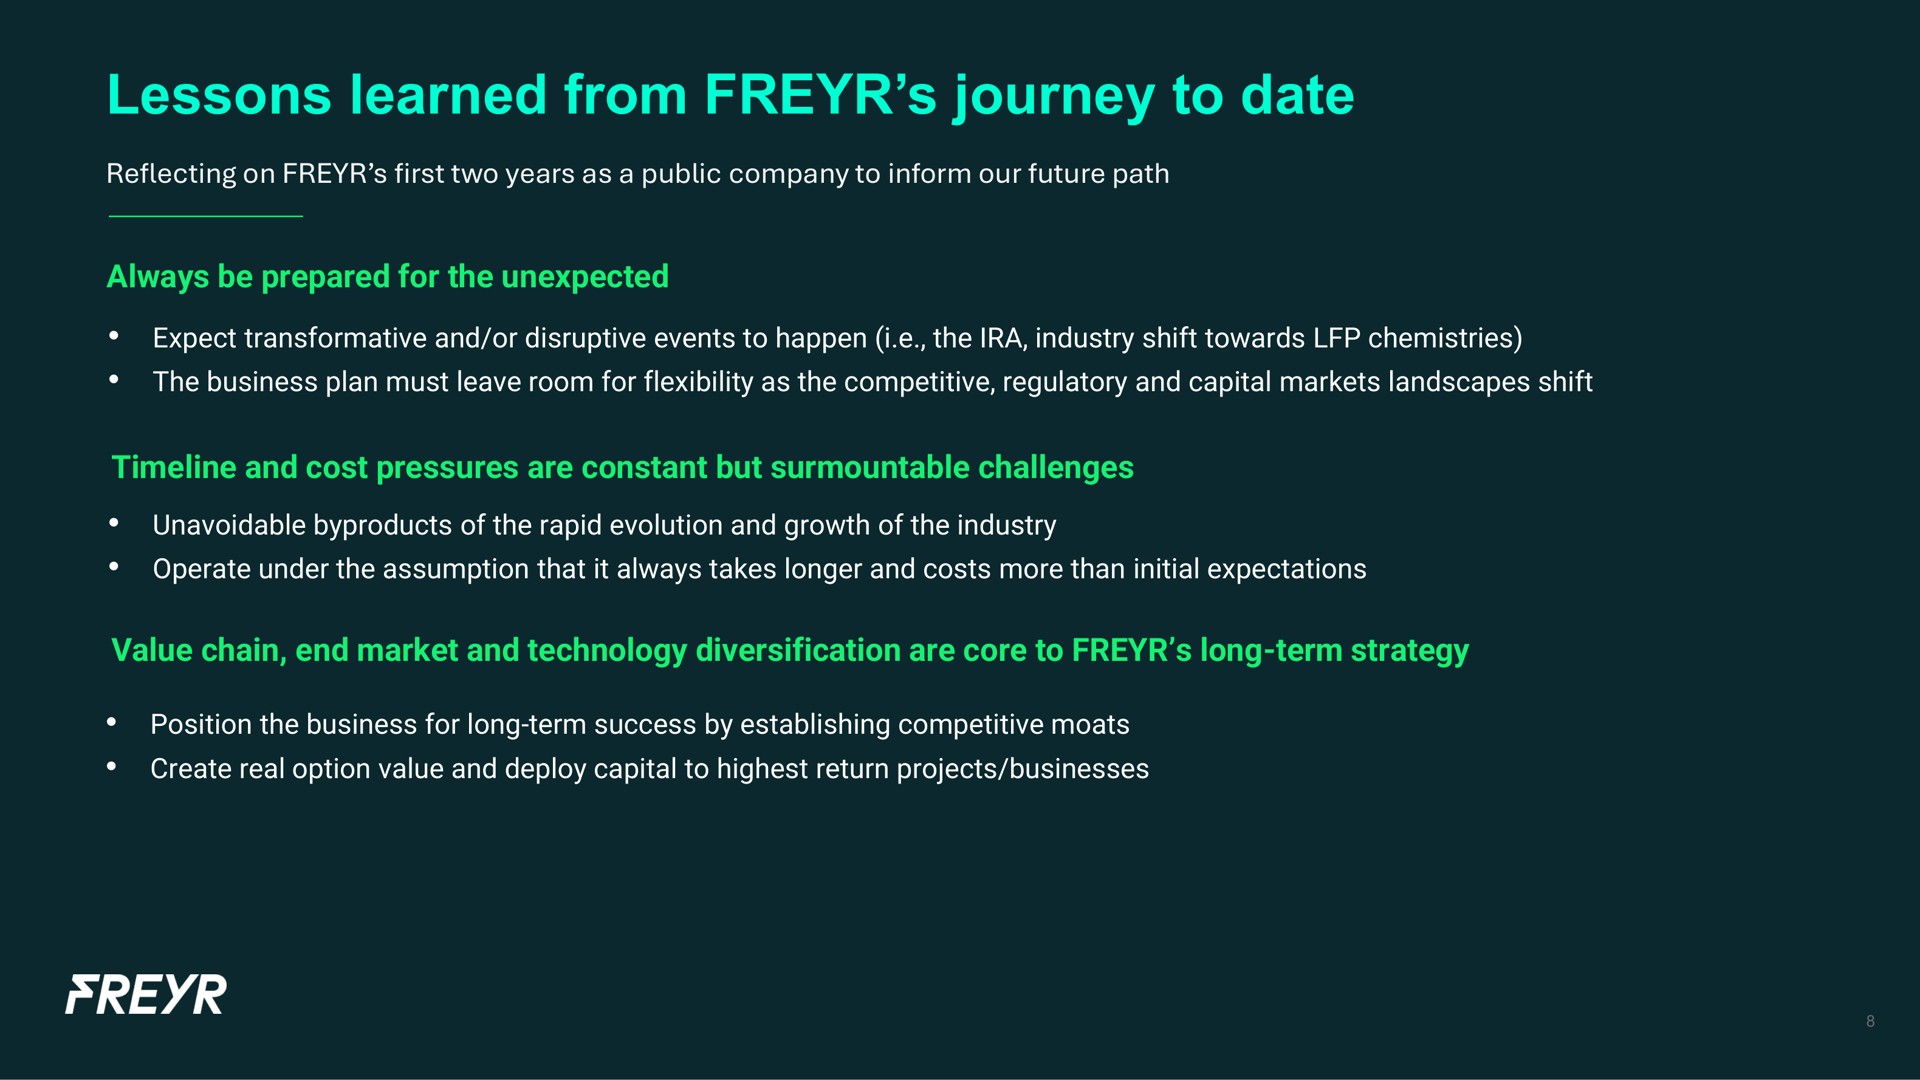 lessons learned from journey to date | Freyr